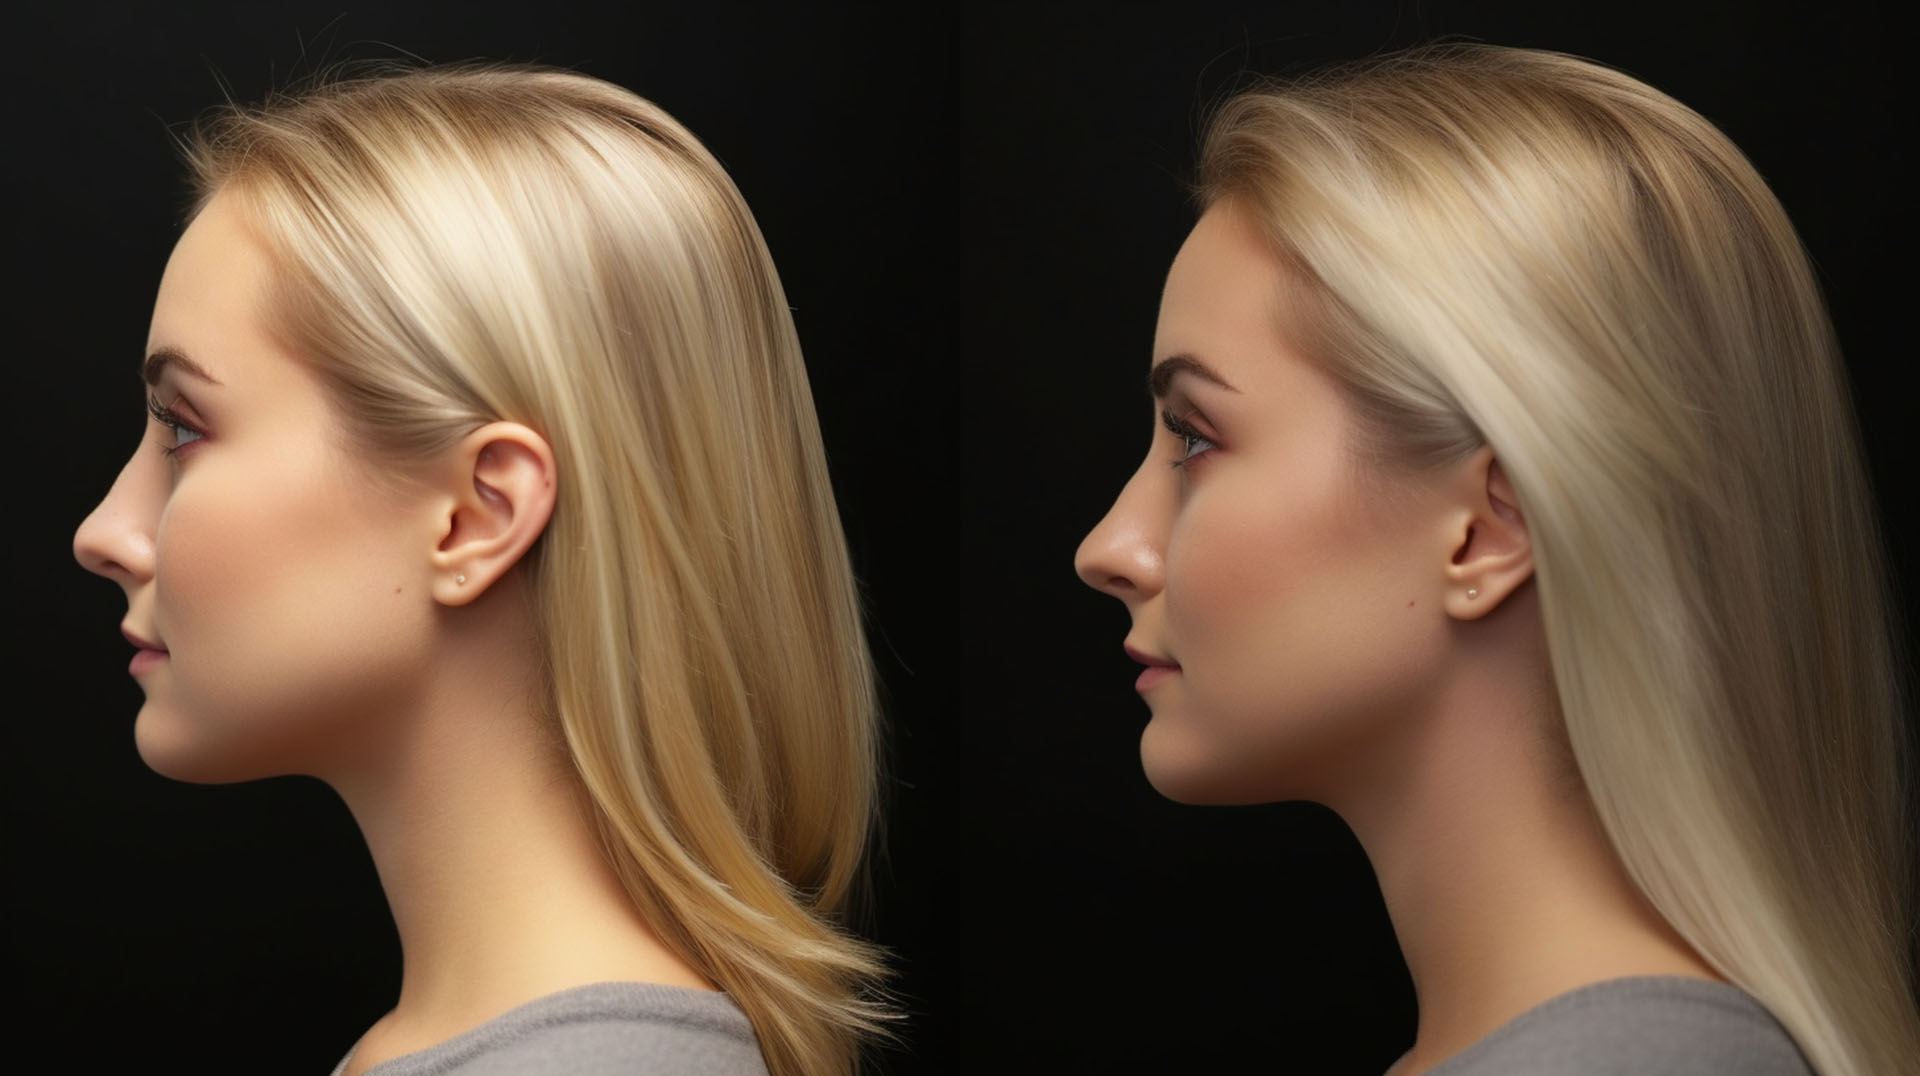 Rhinoplasty Before and After Photo Woodstock